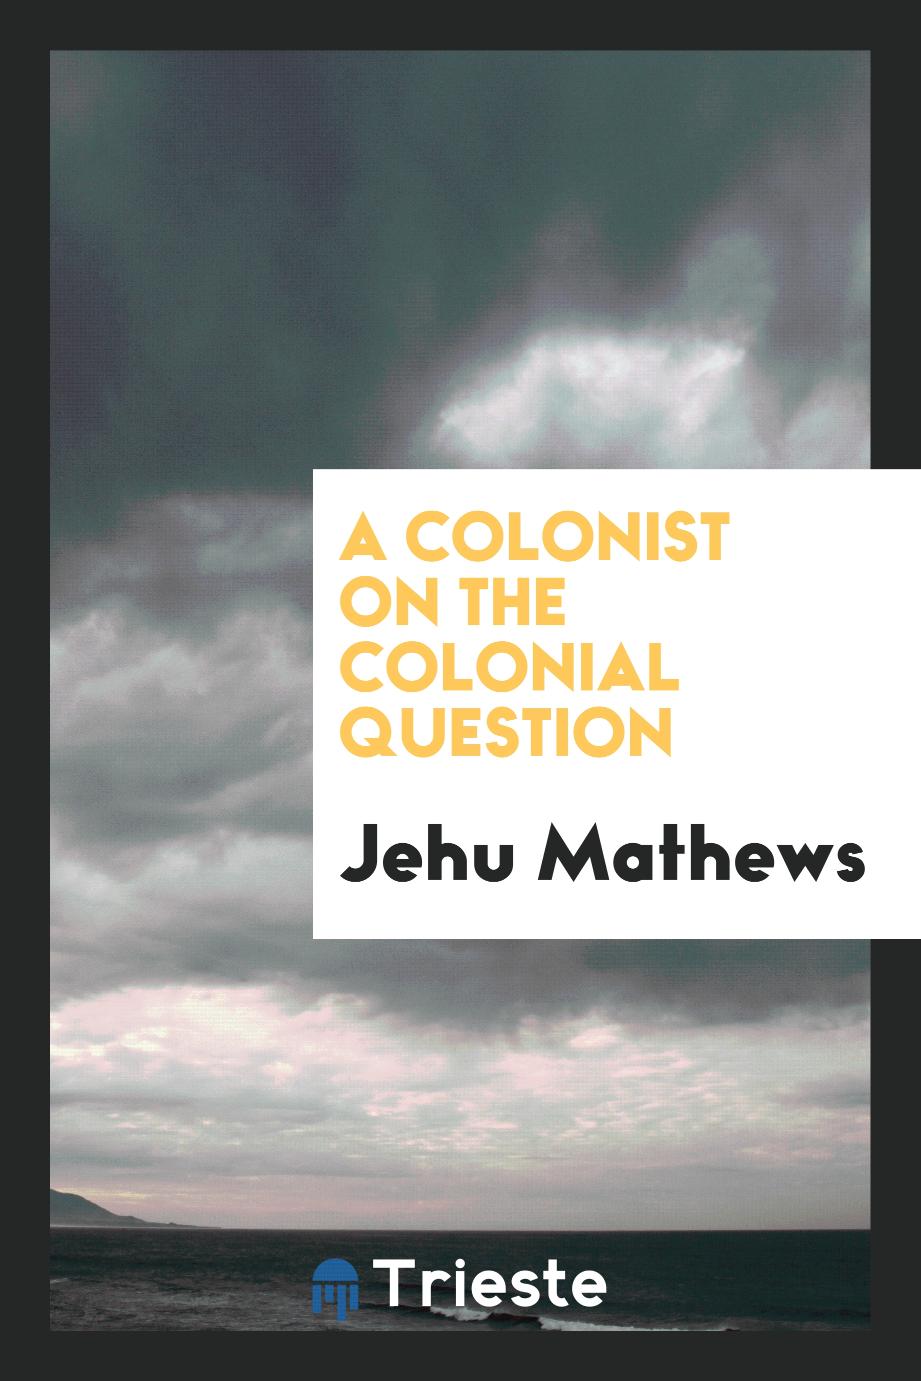 A colonist on the colonial question